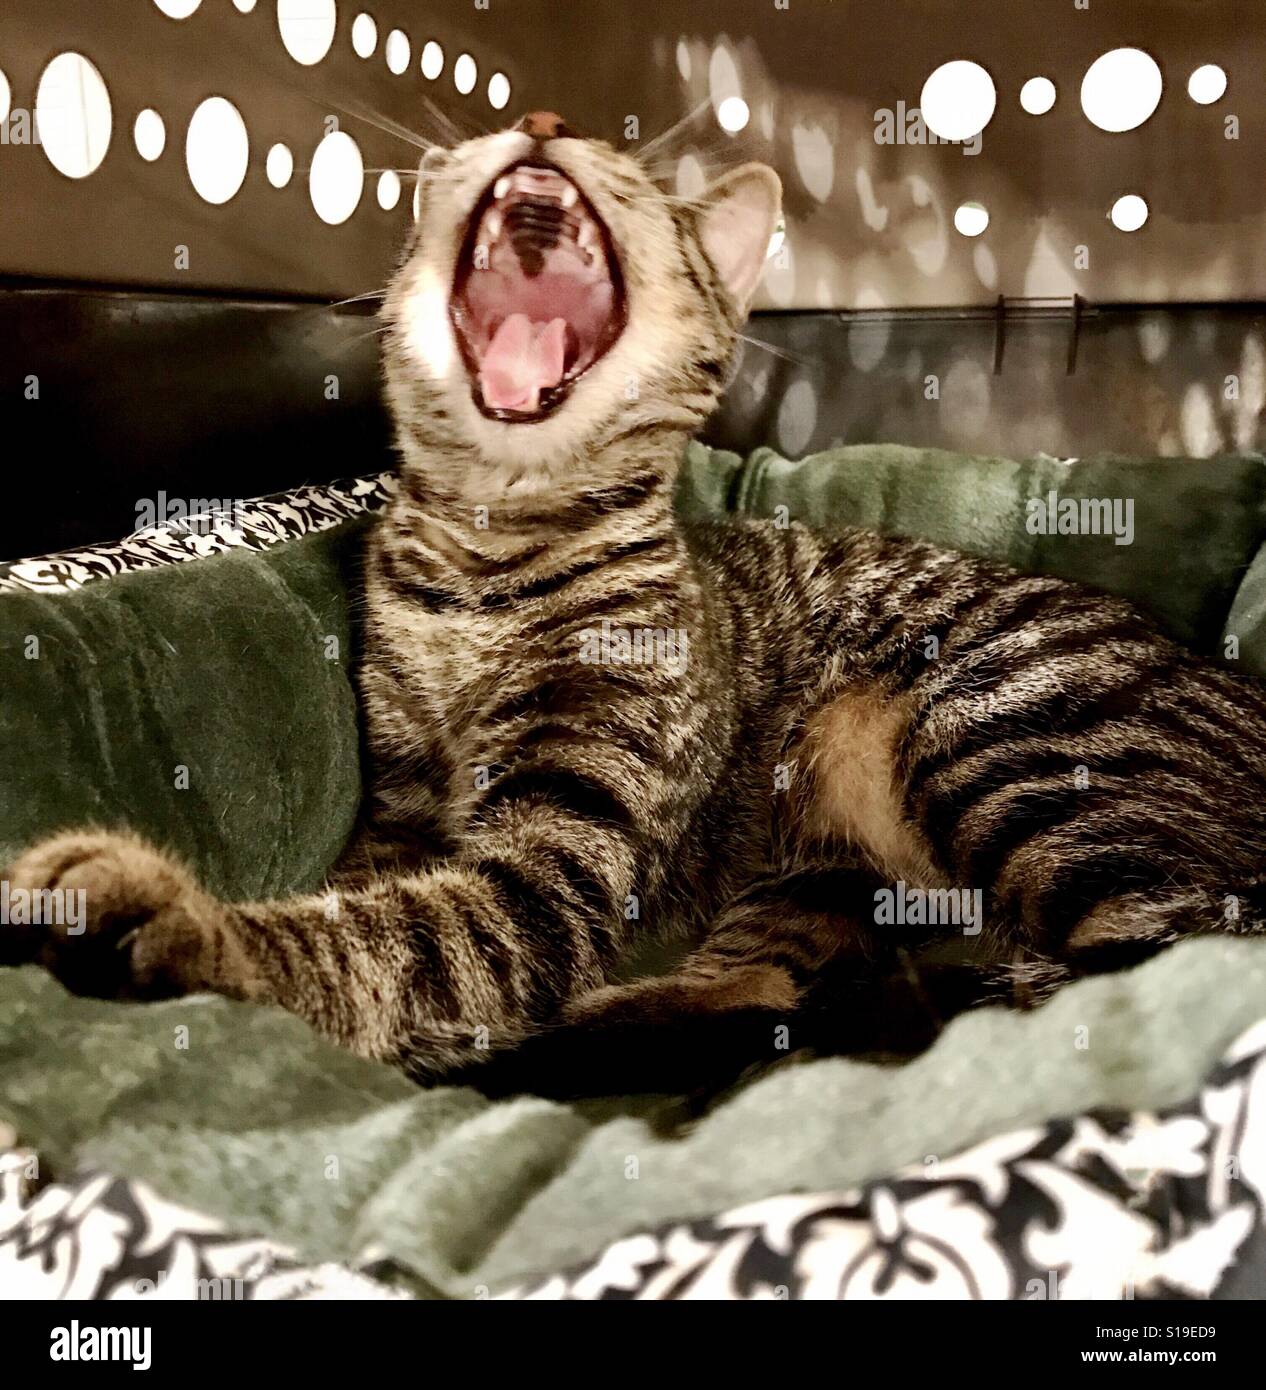 Tabby cat yawning. This one-year-old tabby has really short hair, prominent stripes, and copper-colored eyes. Stock Photo